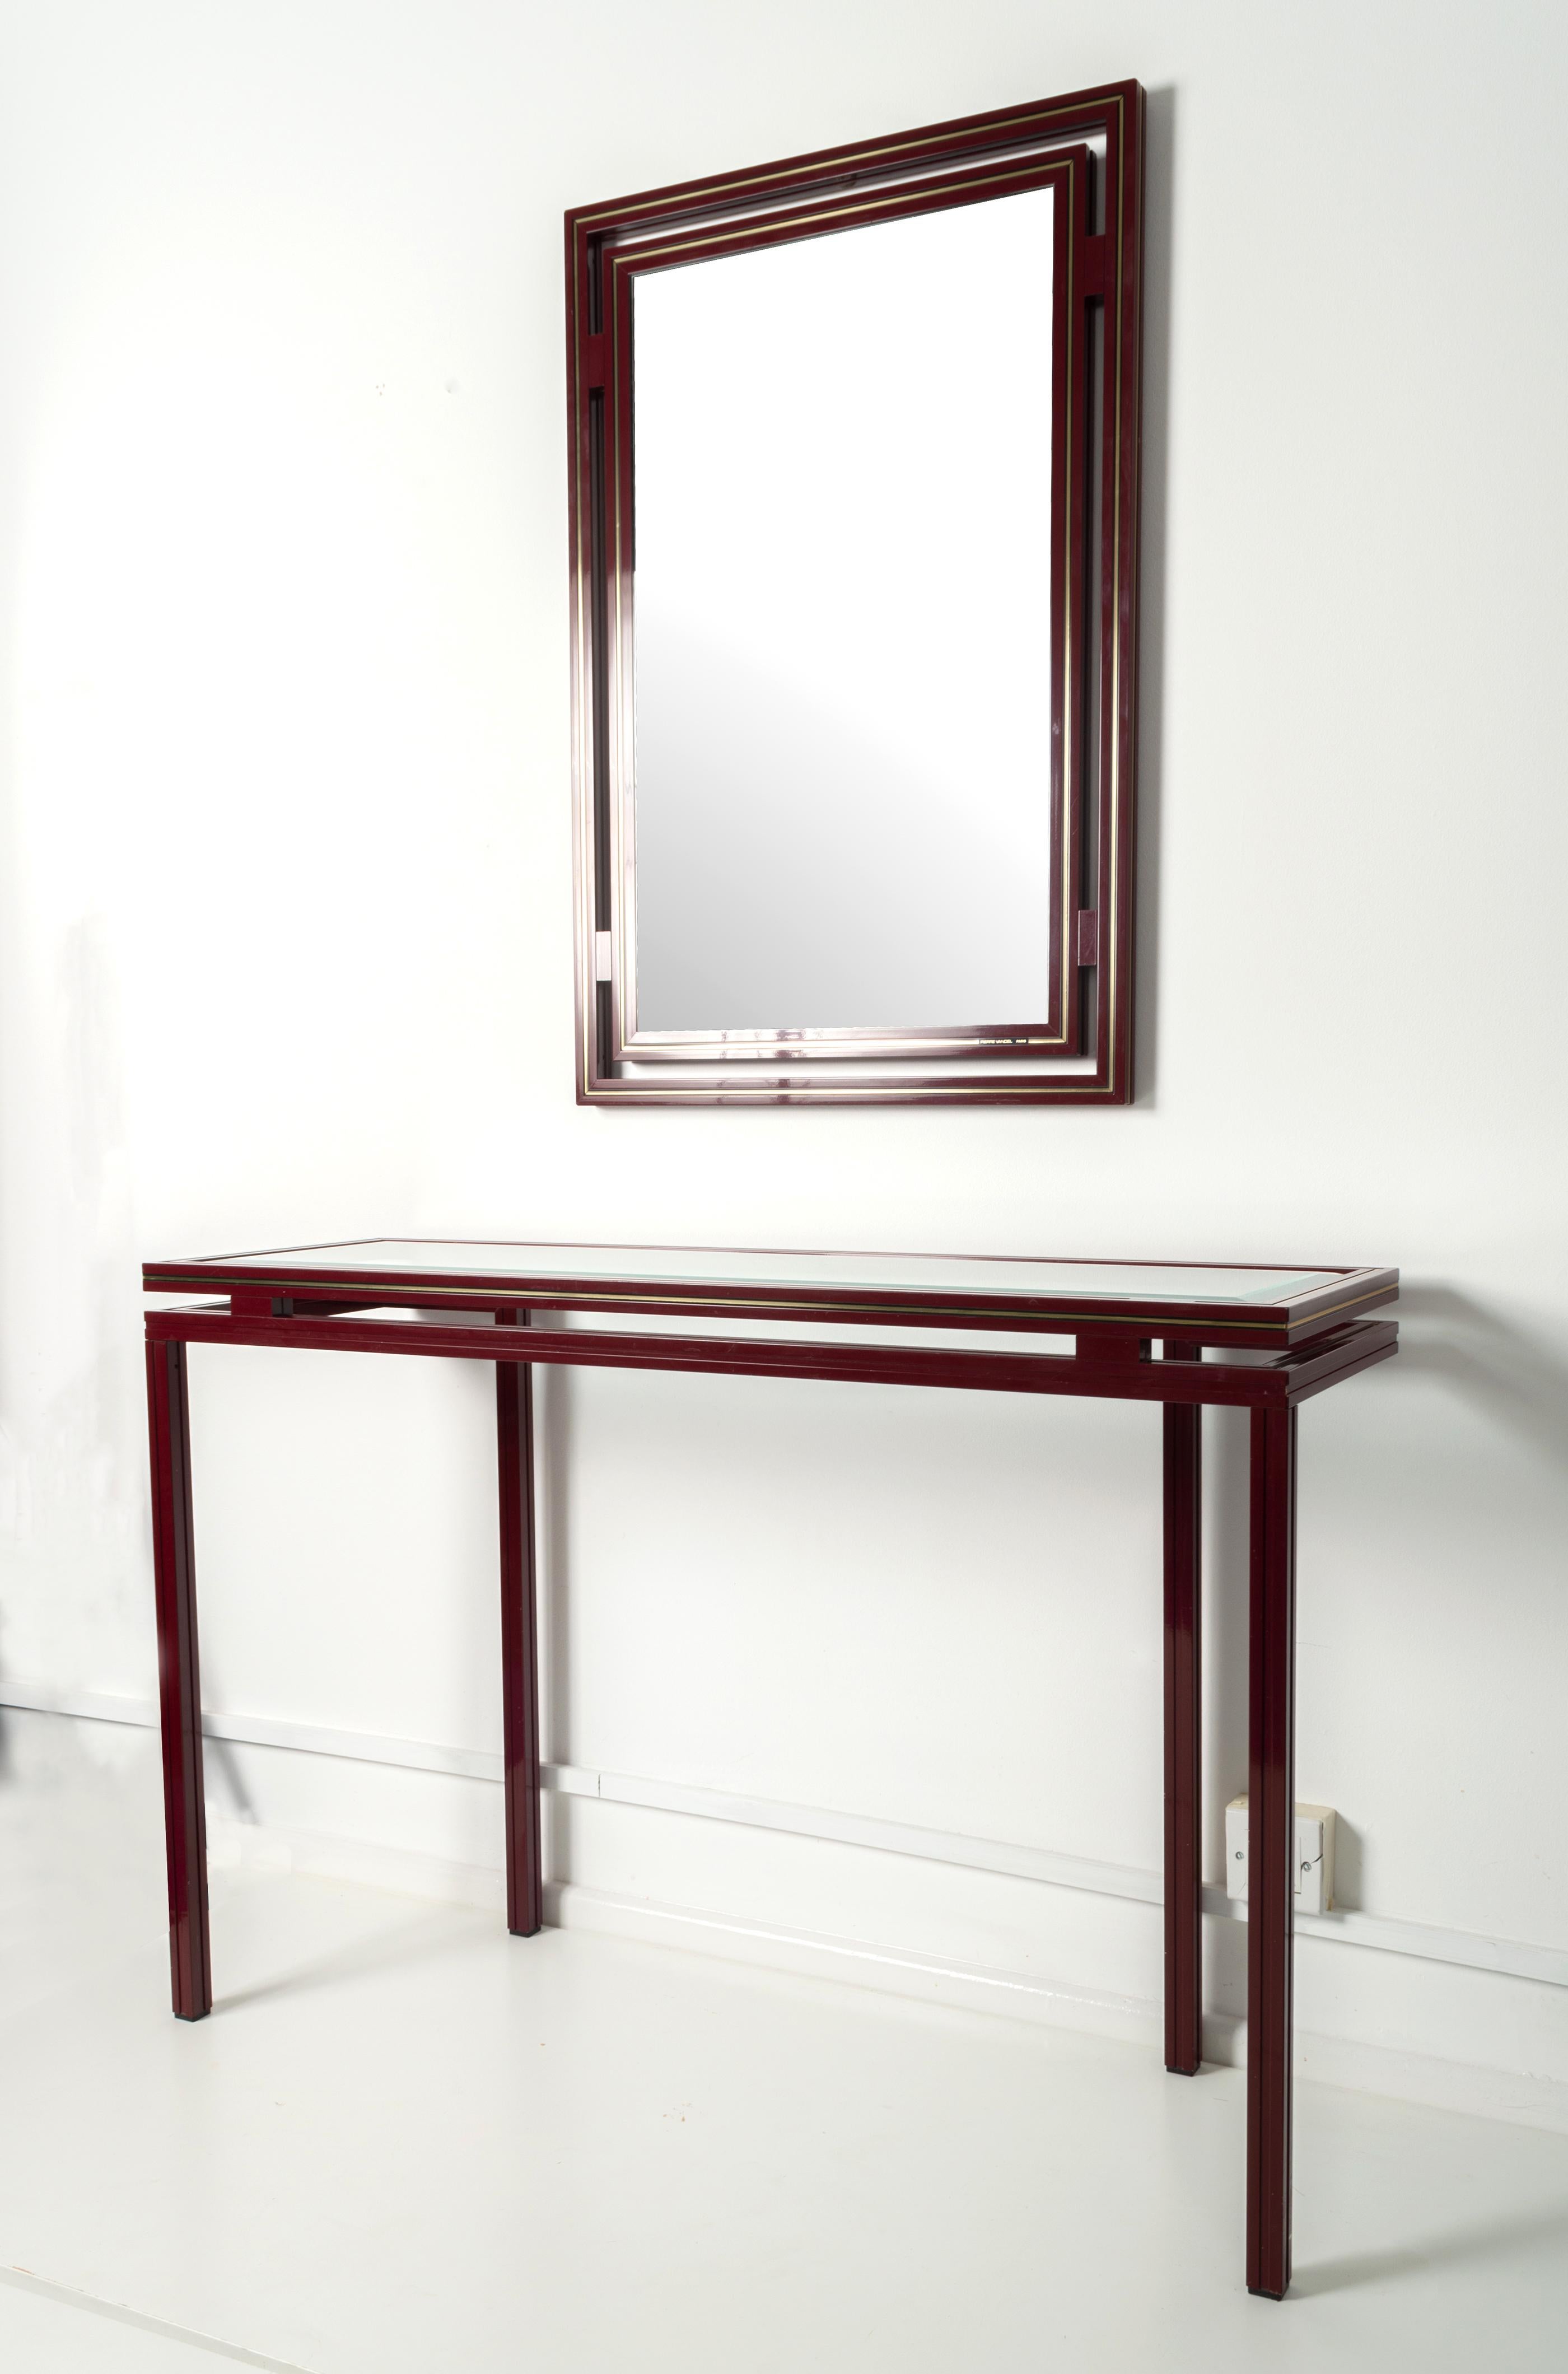 1970s console table and wall mirror by Pierre Vandel, Paris

The rectangular mirror with double striped aluminium lacquered frame in burgundy and gold, signed: 'Pierre Vandel, Paris'.


Mirror;
89cm high x 60cm wide x 3cm